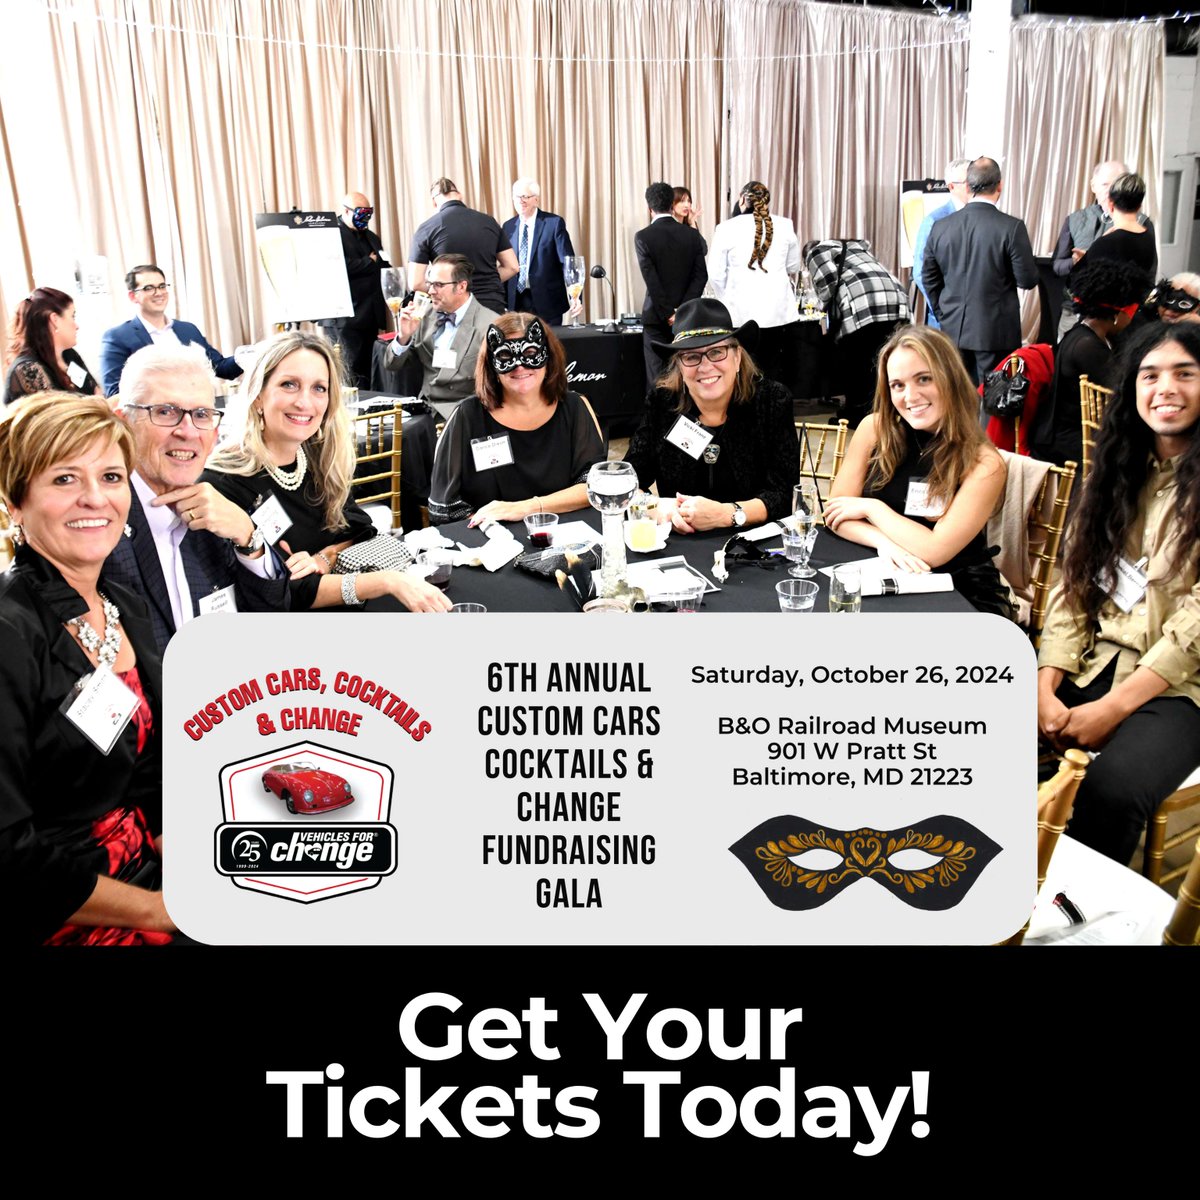 Buy your tickets now or become a sponsor to support our mission of transforming lives through access to transportation and job training. Your participation helps drive change and empowers our community. 

vehiclesforchange.salsalabs.org/c4vfc2024/inde…

#C4Gala #VehiclesForChange #DriveChange